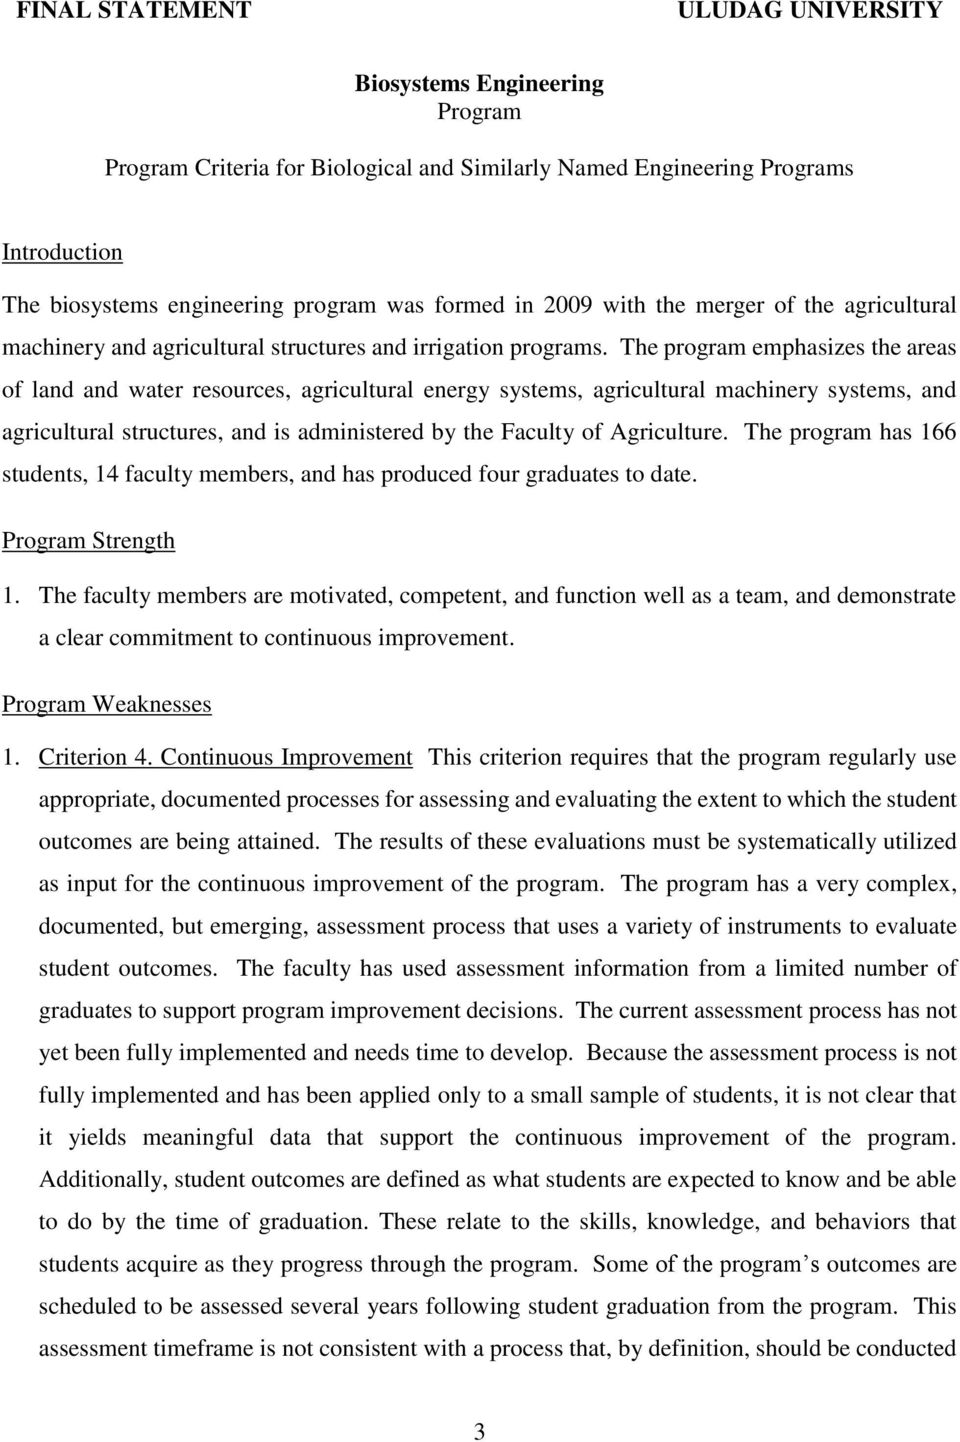 The program emphasizes the areas of land and water resources, agricultural energy systems, agricultural machinery systems, and agricultural structures, and is administered by the Faculty of